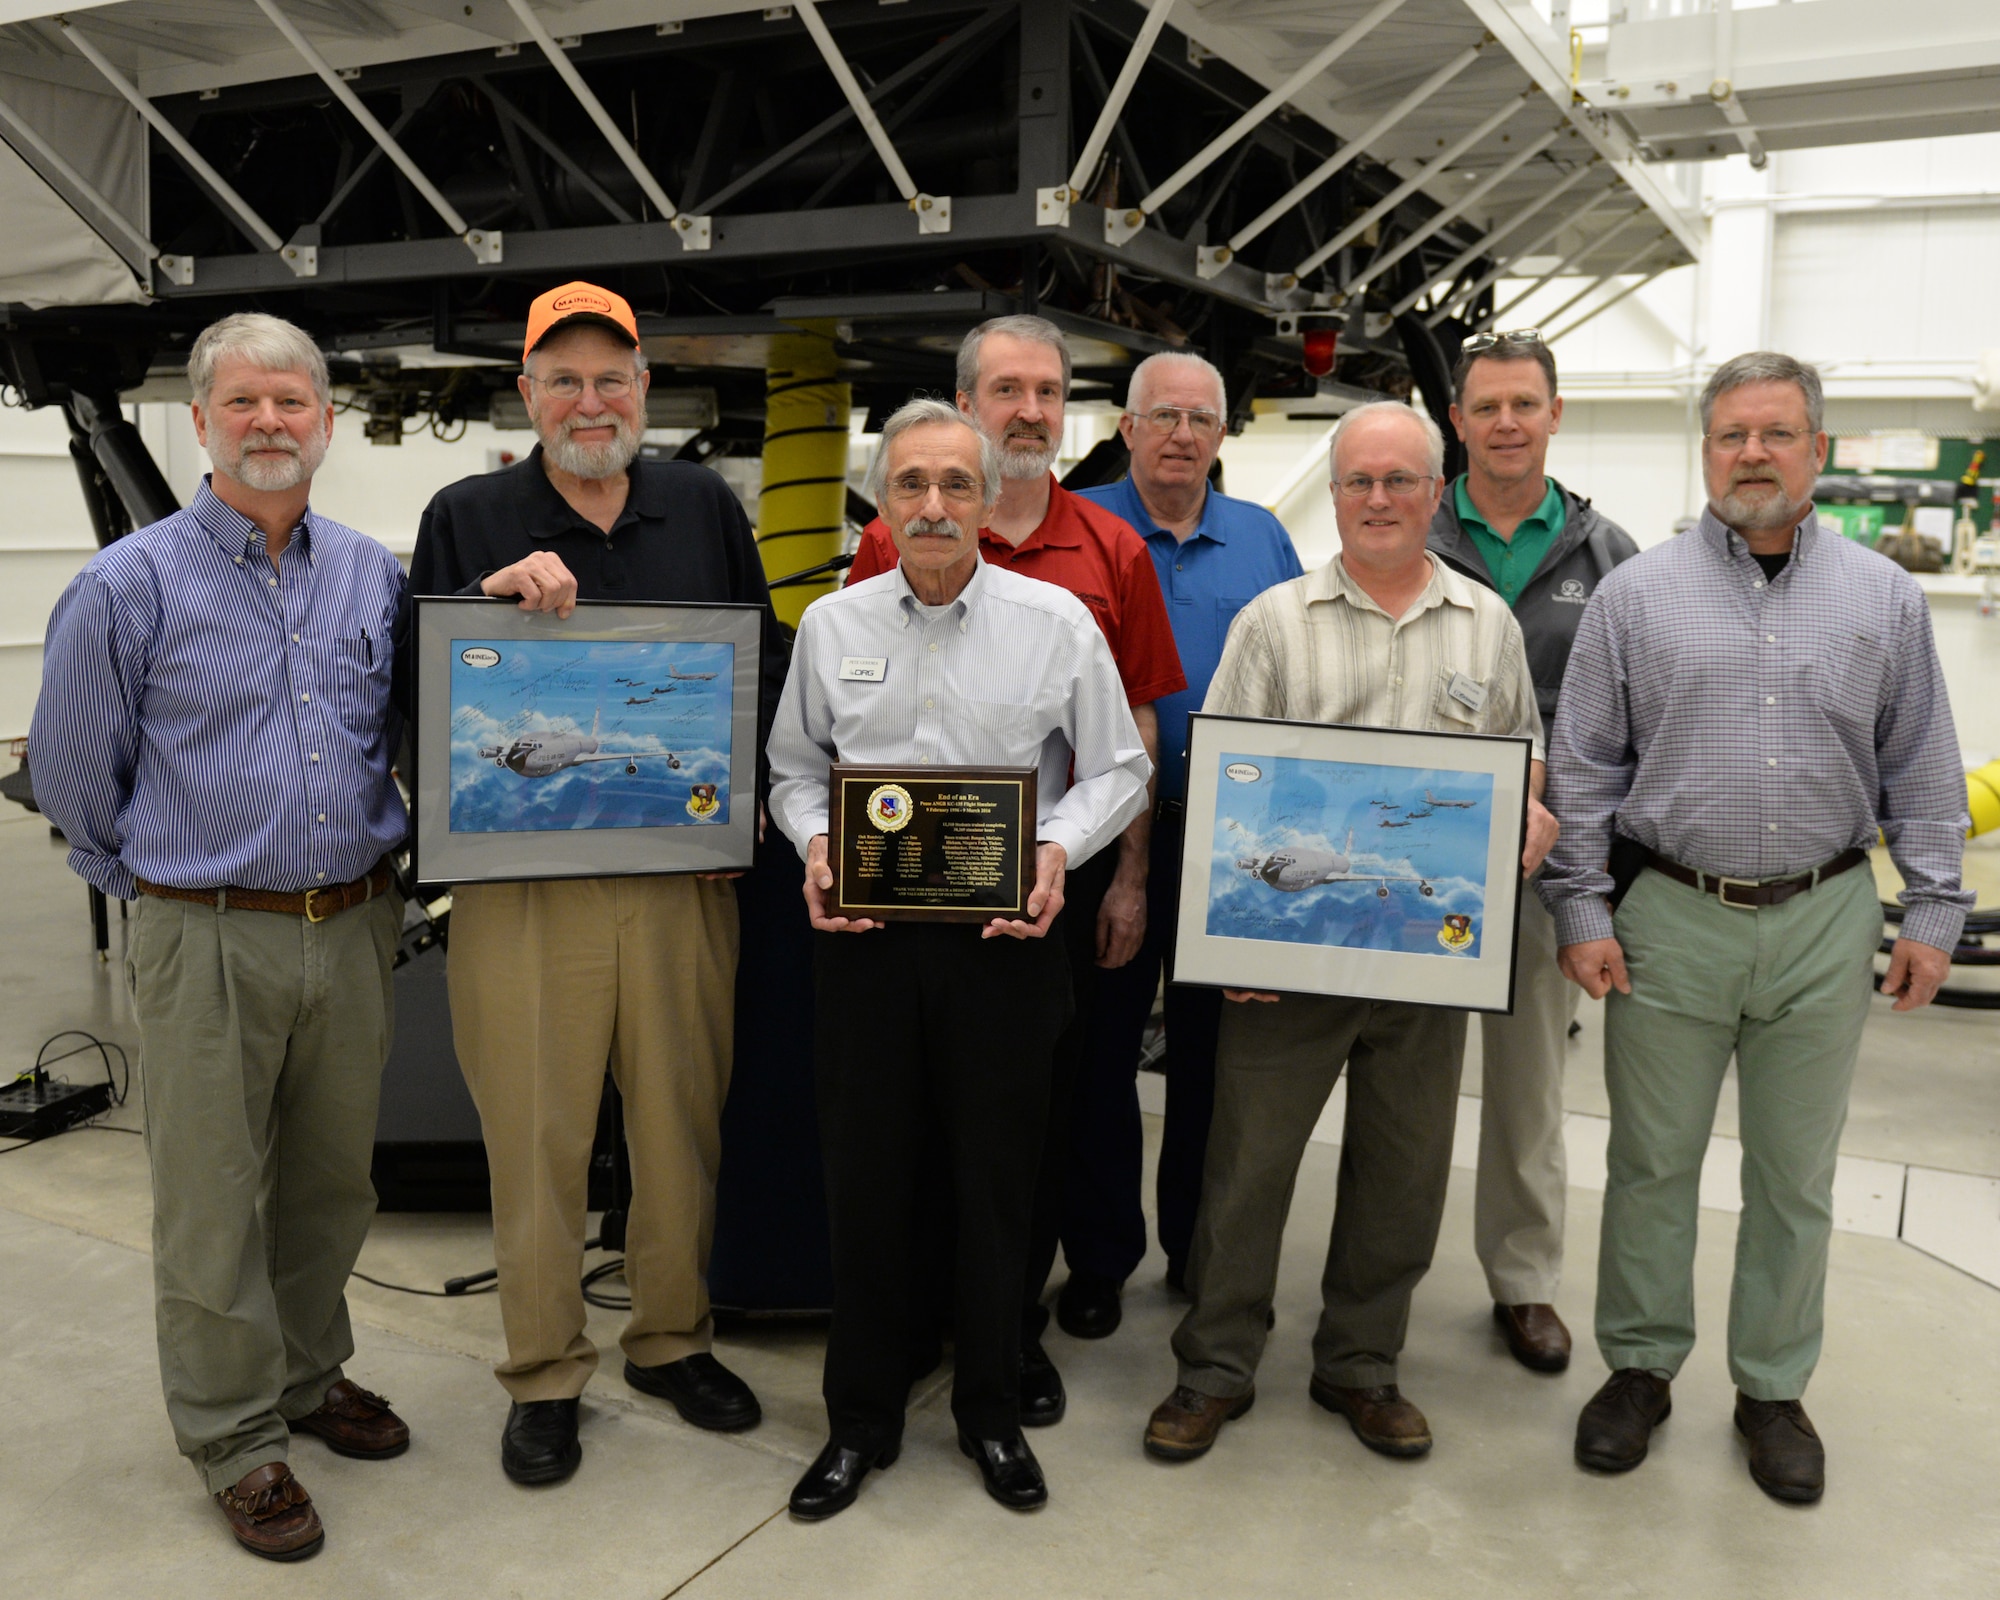 Instructors and technicians from Delaware Resource Group pose for a photograph after the retirement of the KC-135 flight simulator from Pease Air National Guard Base, New Hampshire, March, 9, 2016.  DRG supports the daily operation of the simulator. The simulator is being retired to make way for a new KC-46 weapons trainer slated to arrive in the spring of 2017. (U.S. Air National Guard photo by Staff Sgt. Curtis J. Lenz)